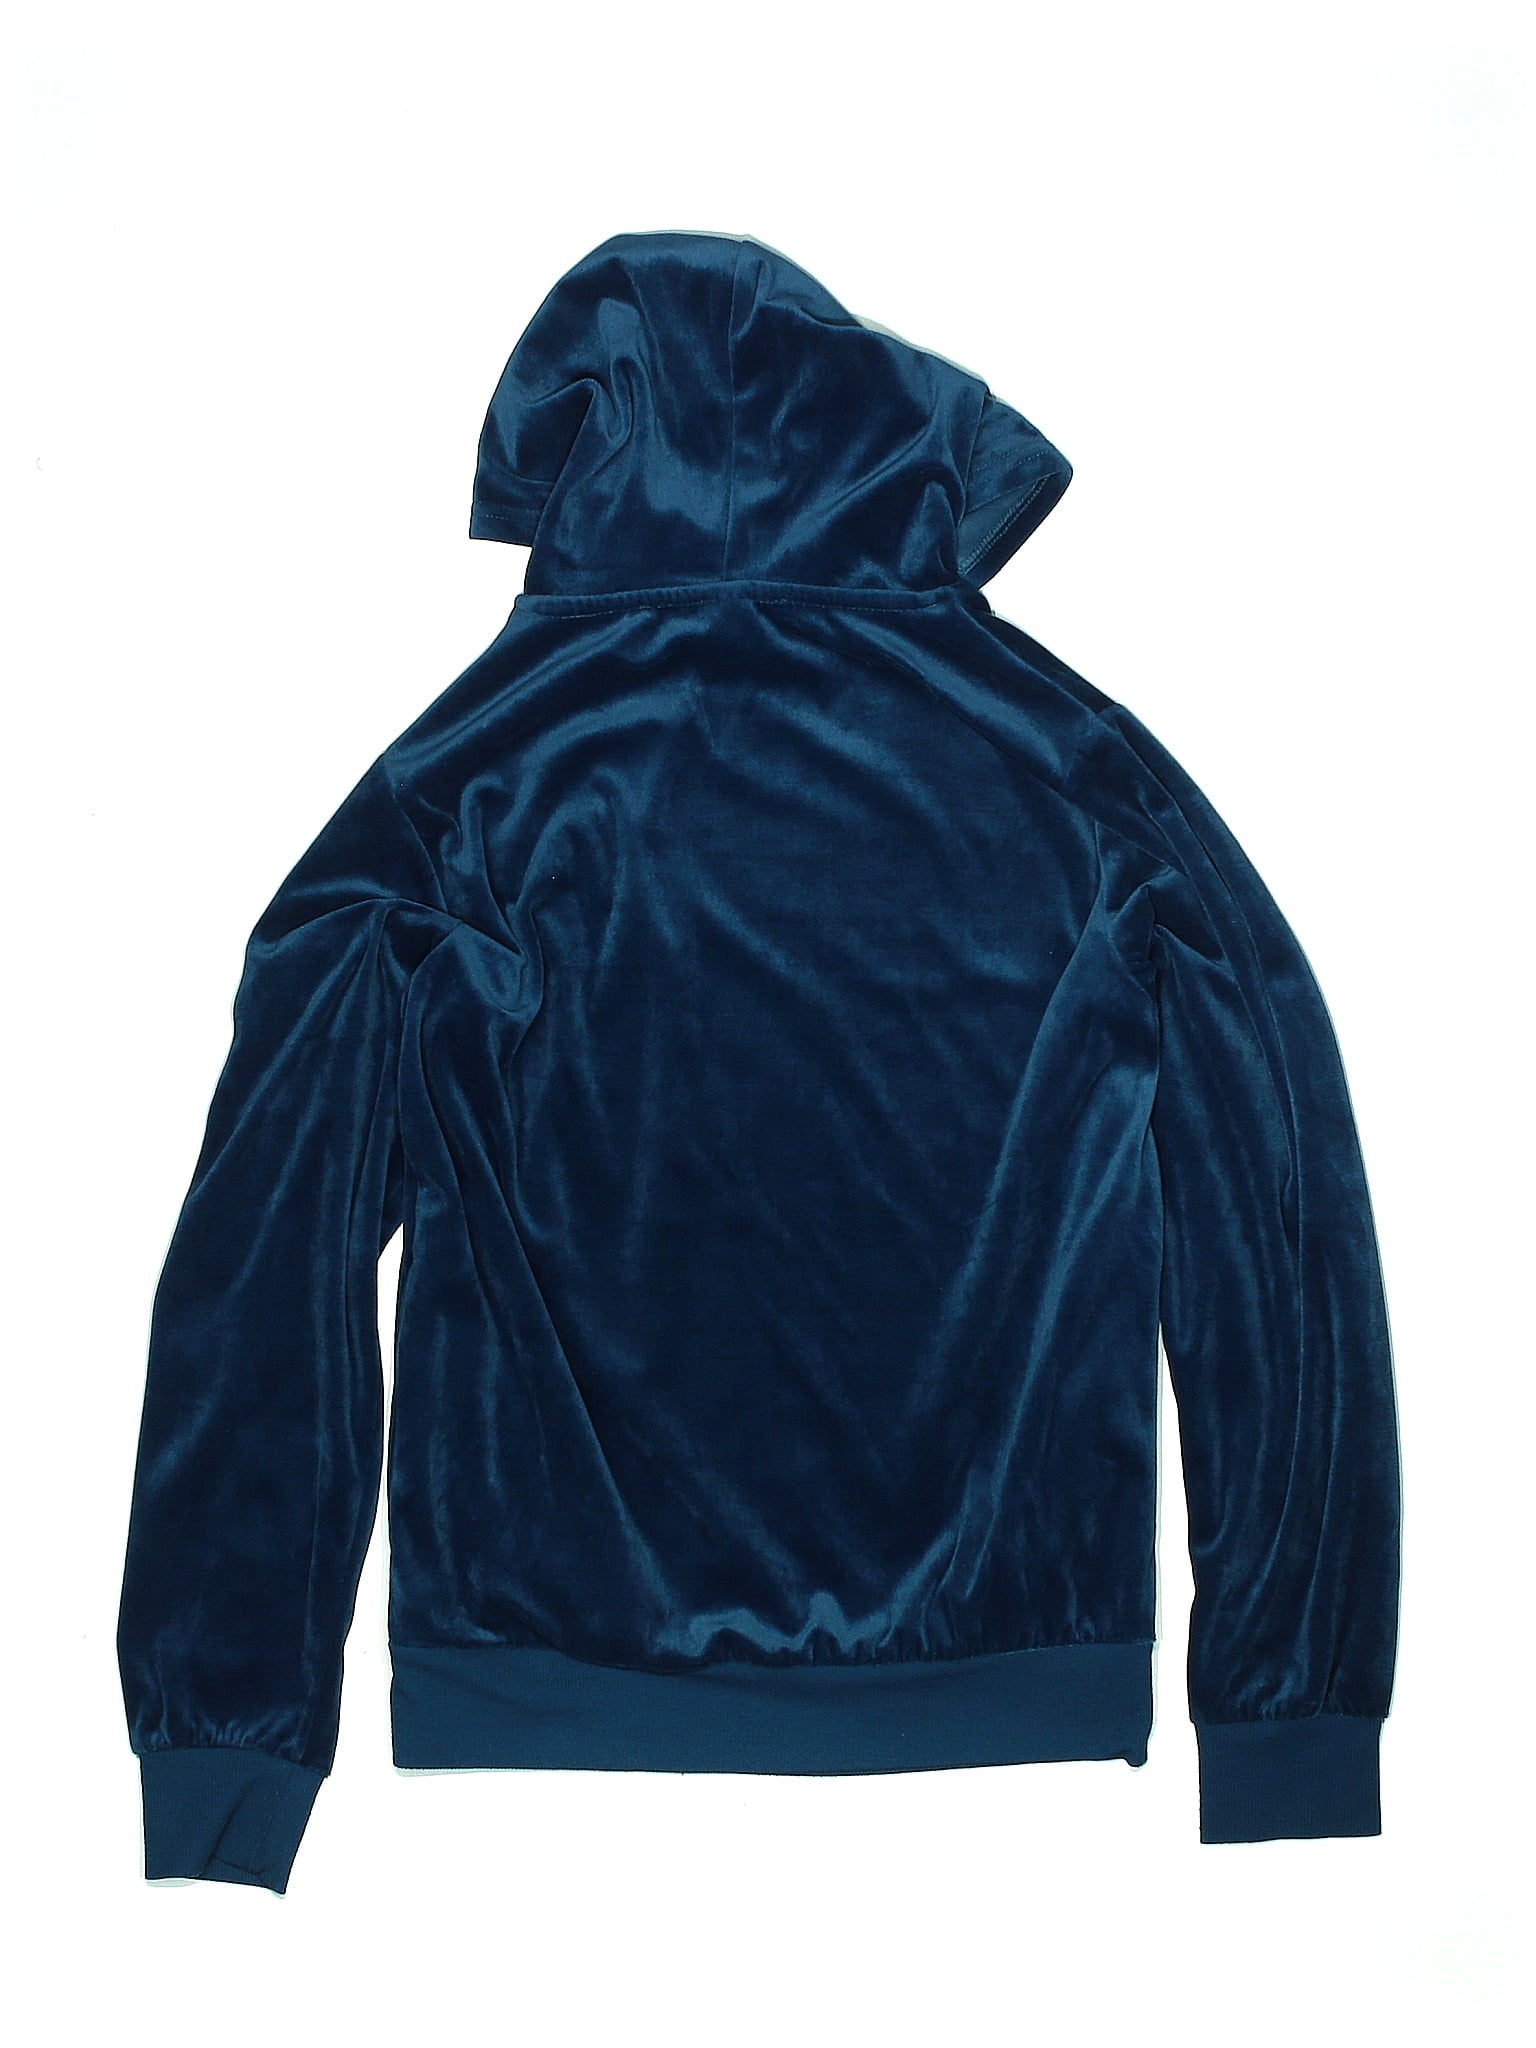 Pullover Hoodie size - X-Small (Youth)